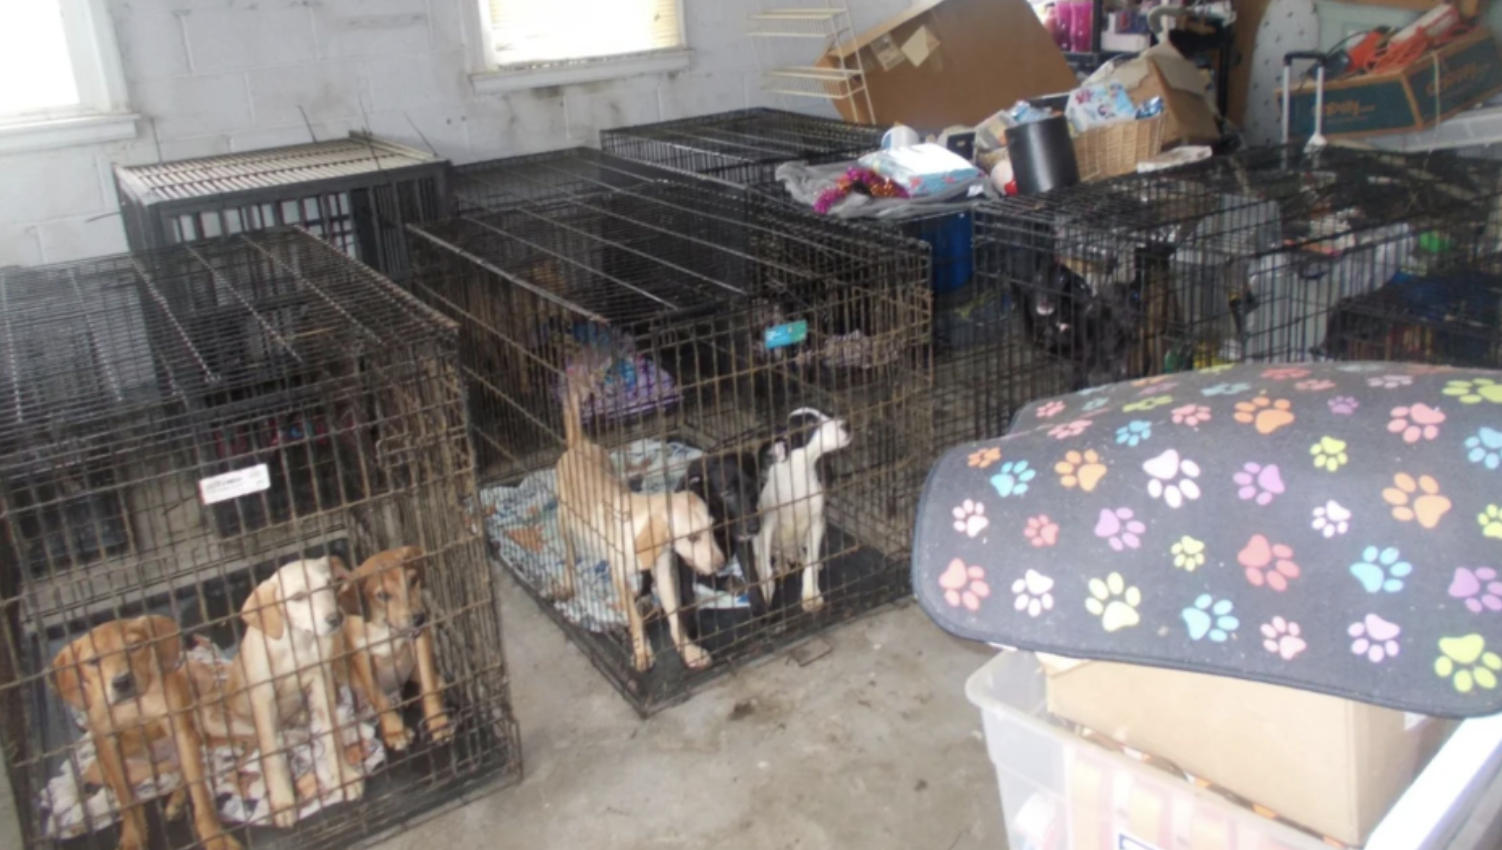 They discover dead dogs and several malnourished in the US rescue center.
